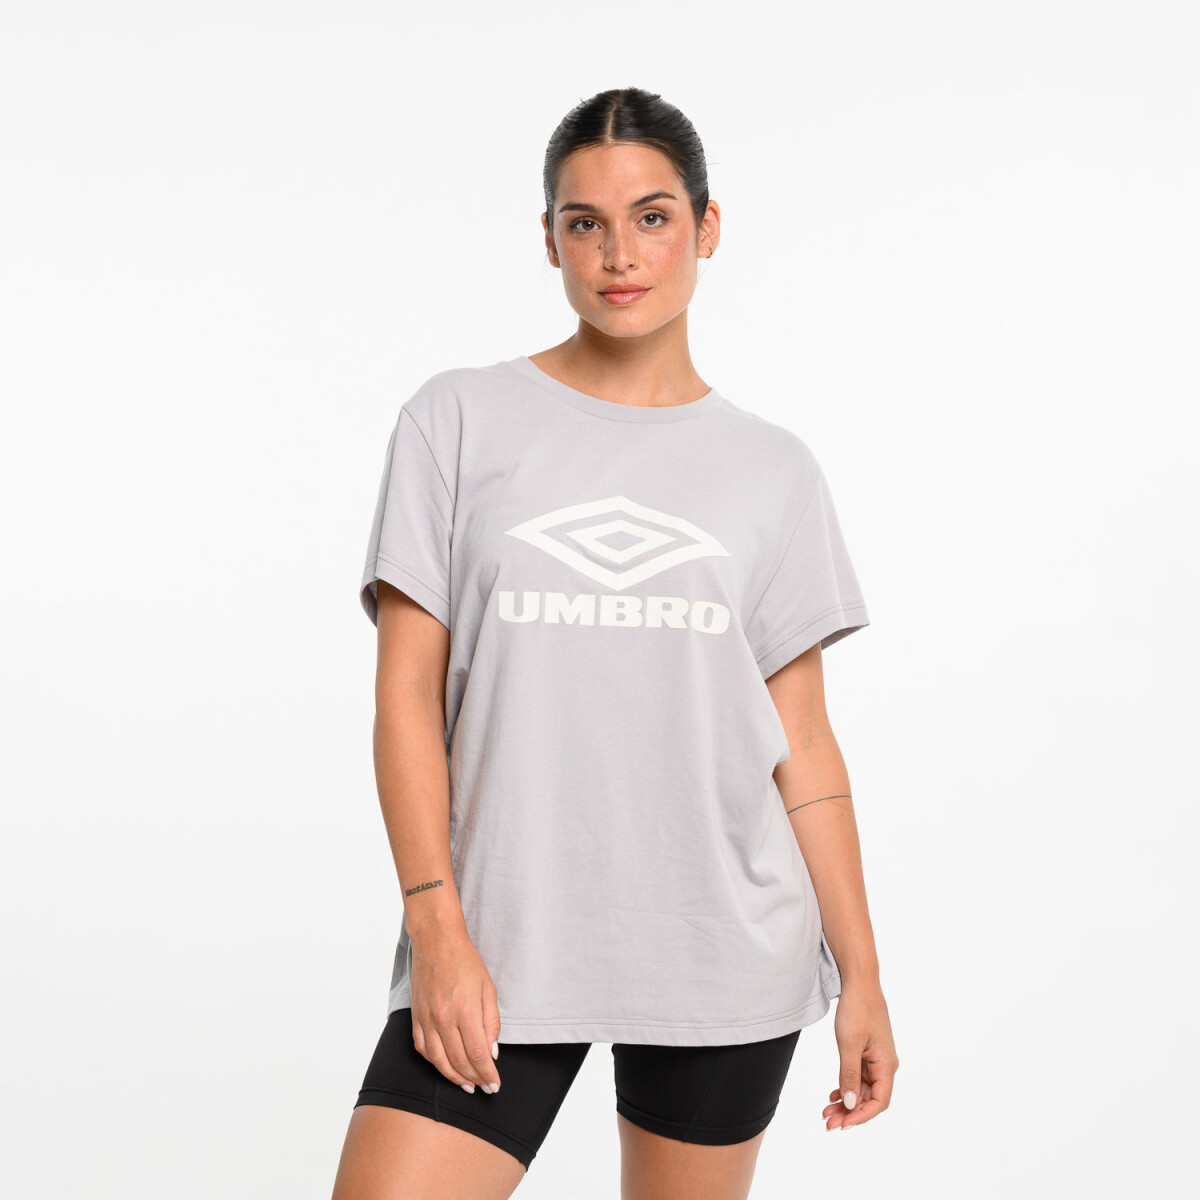 Remera Over Umbro Mujer - 059 